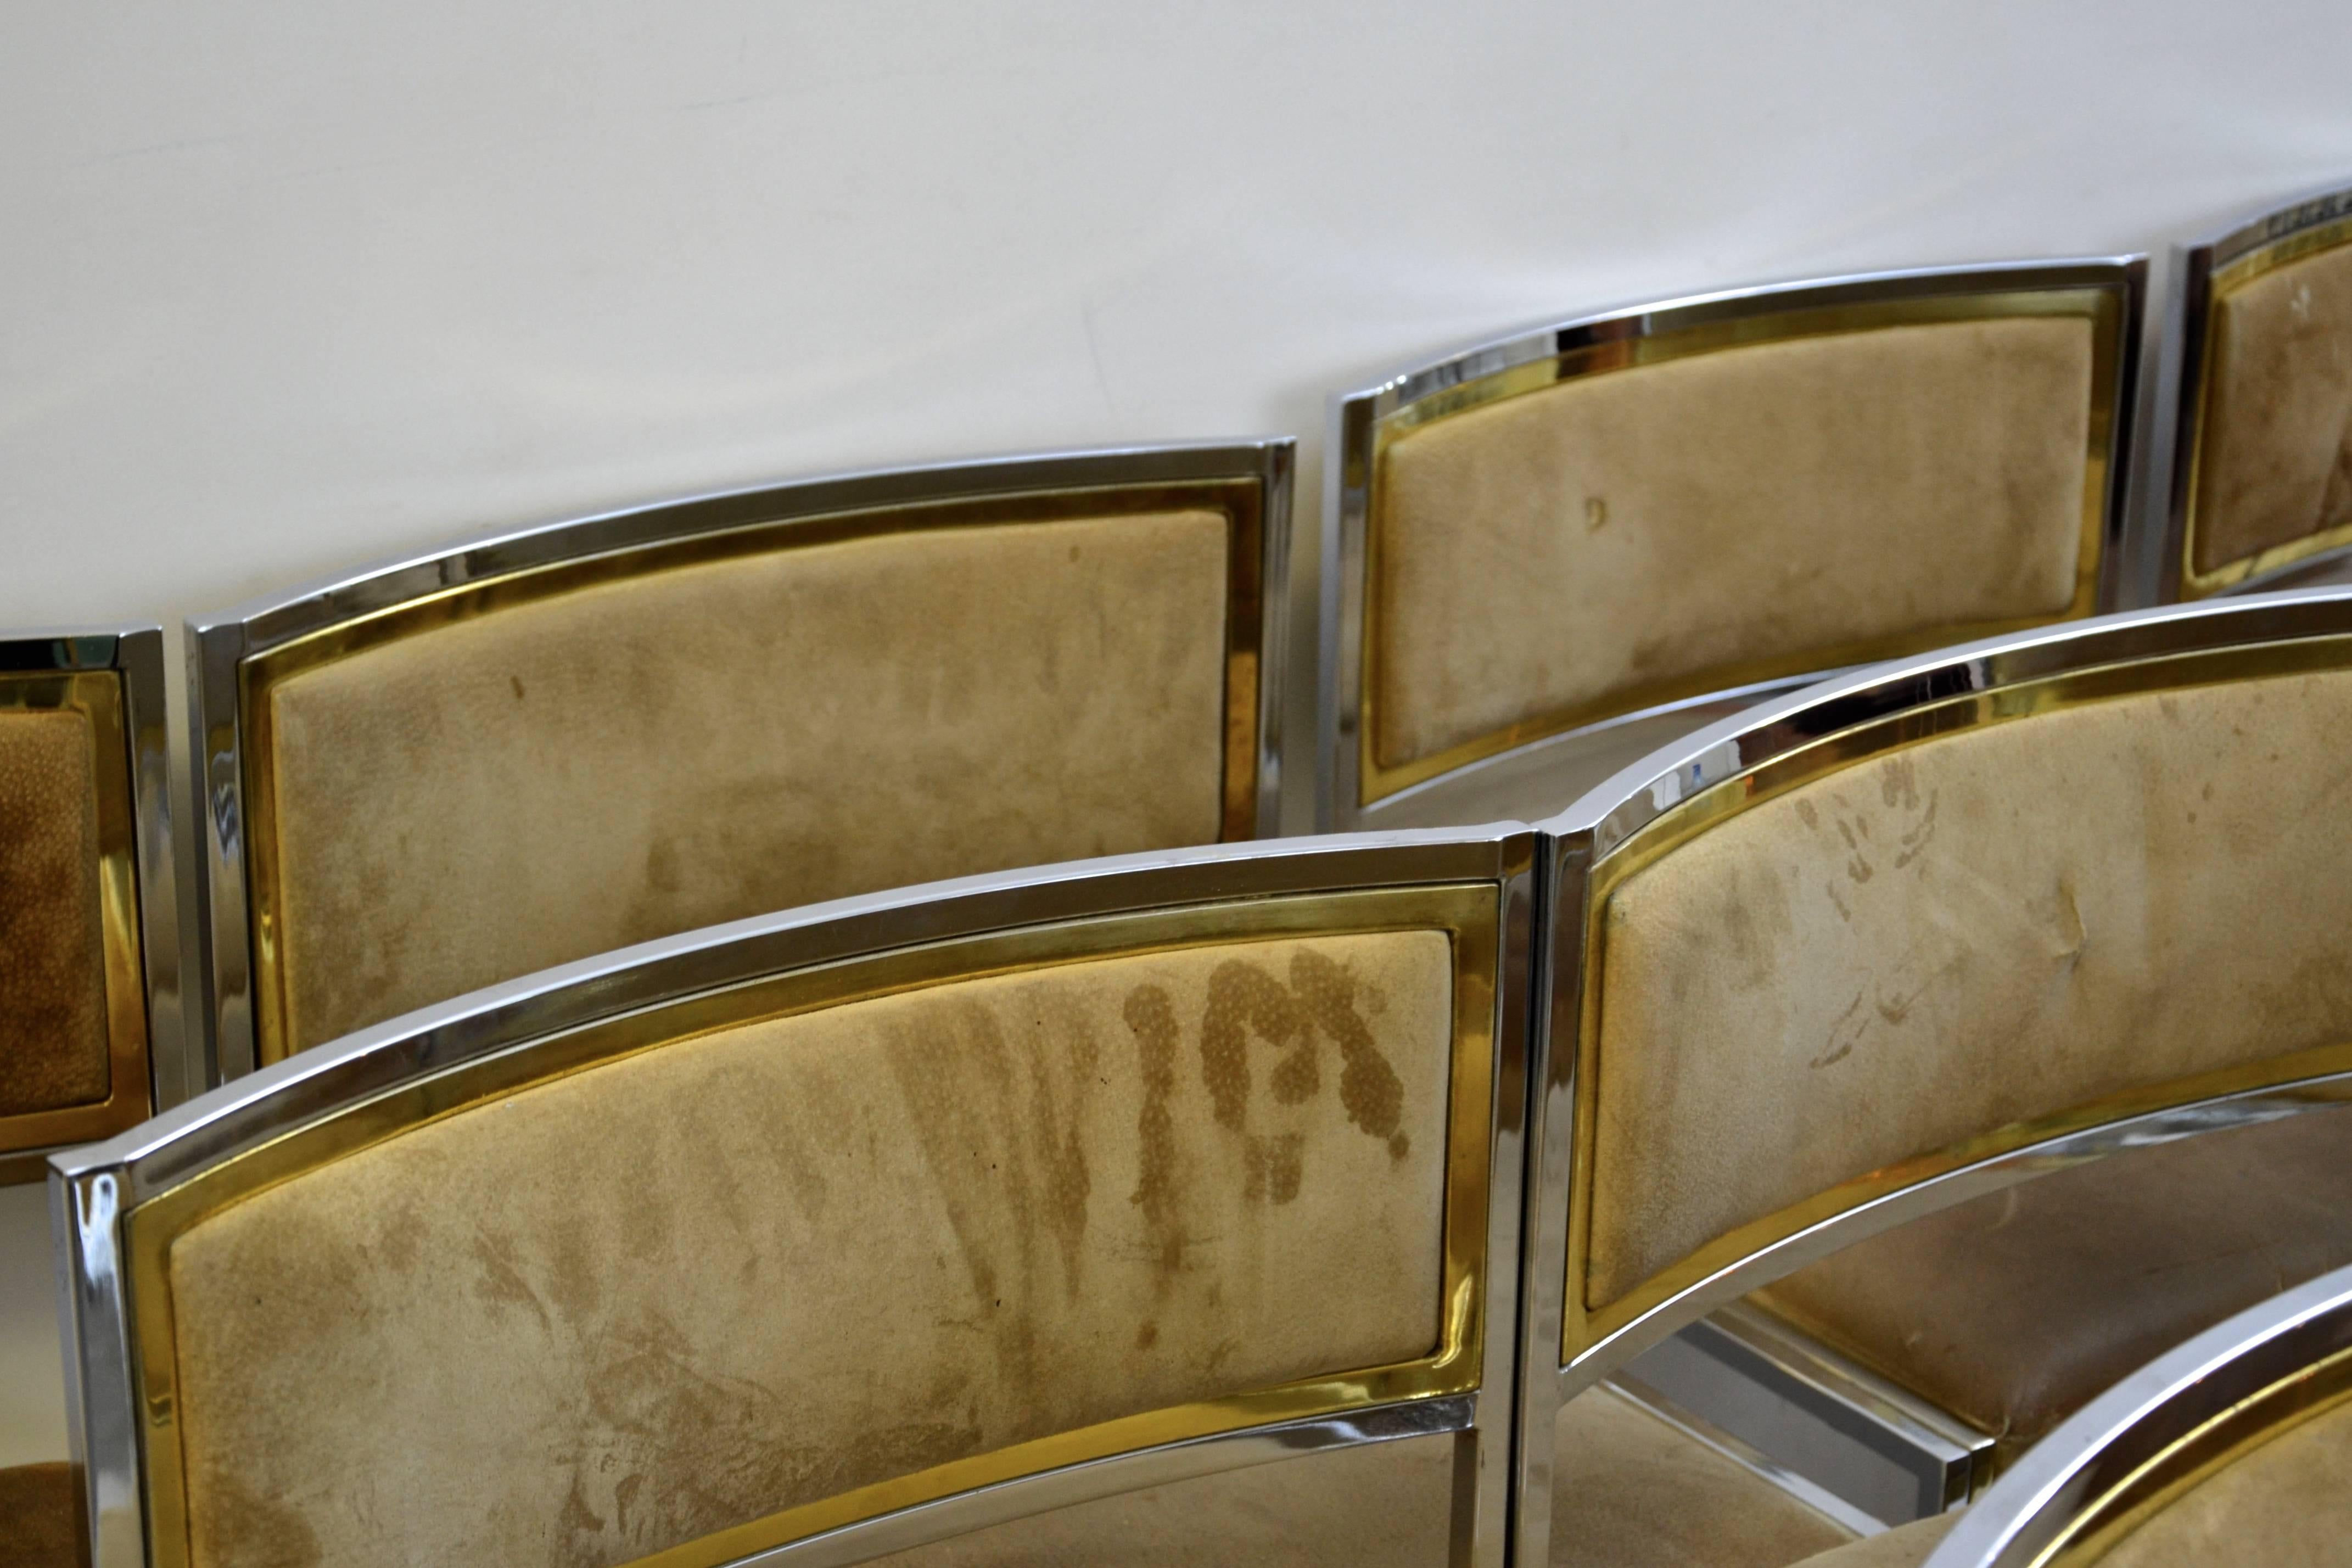 Italian Set of Ten 1970s Willy Rizzo Chairs in Brass and Chrome, to be Re-Upholstered